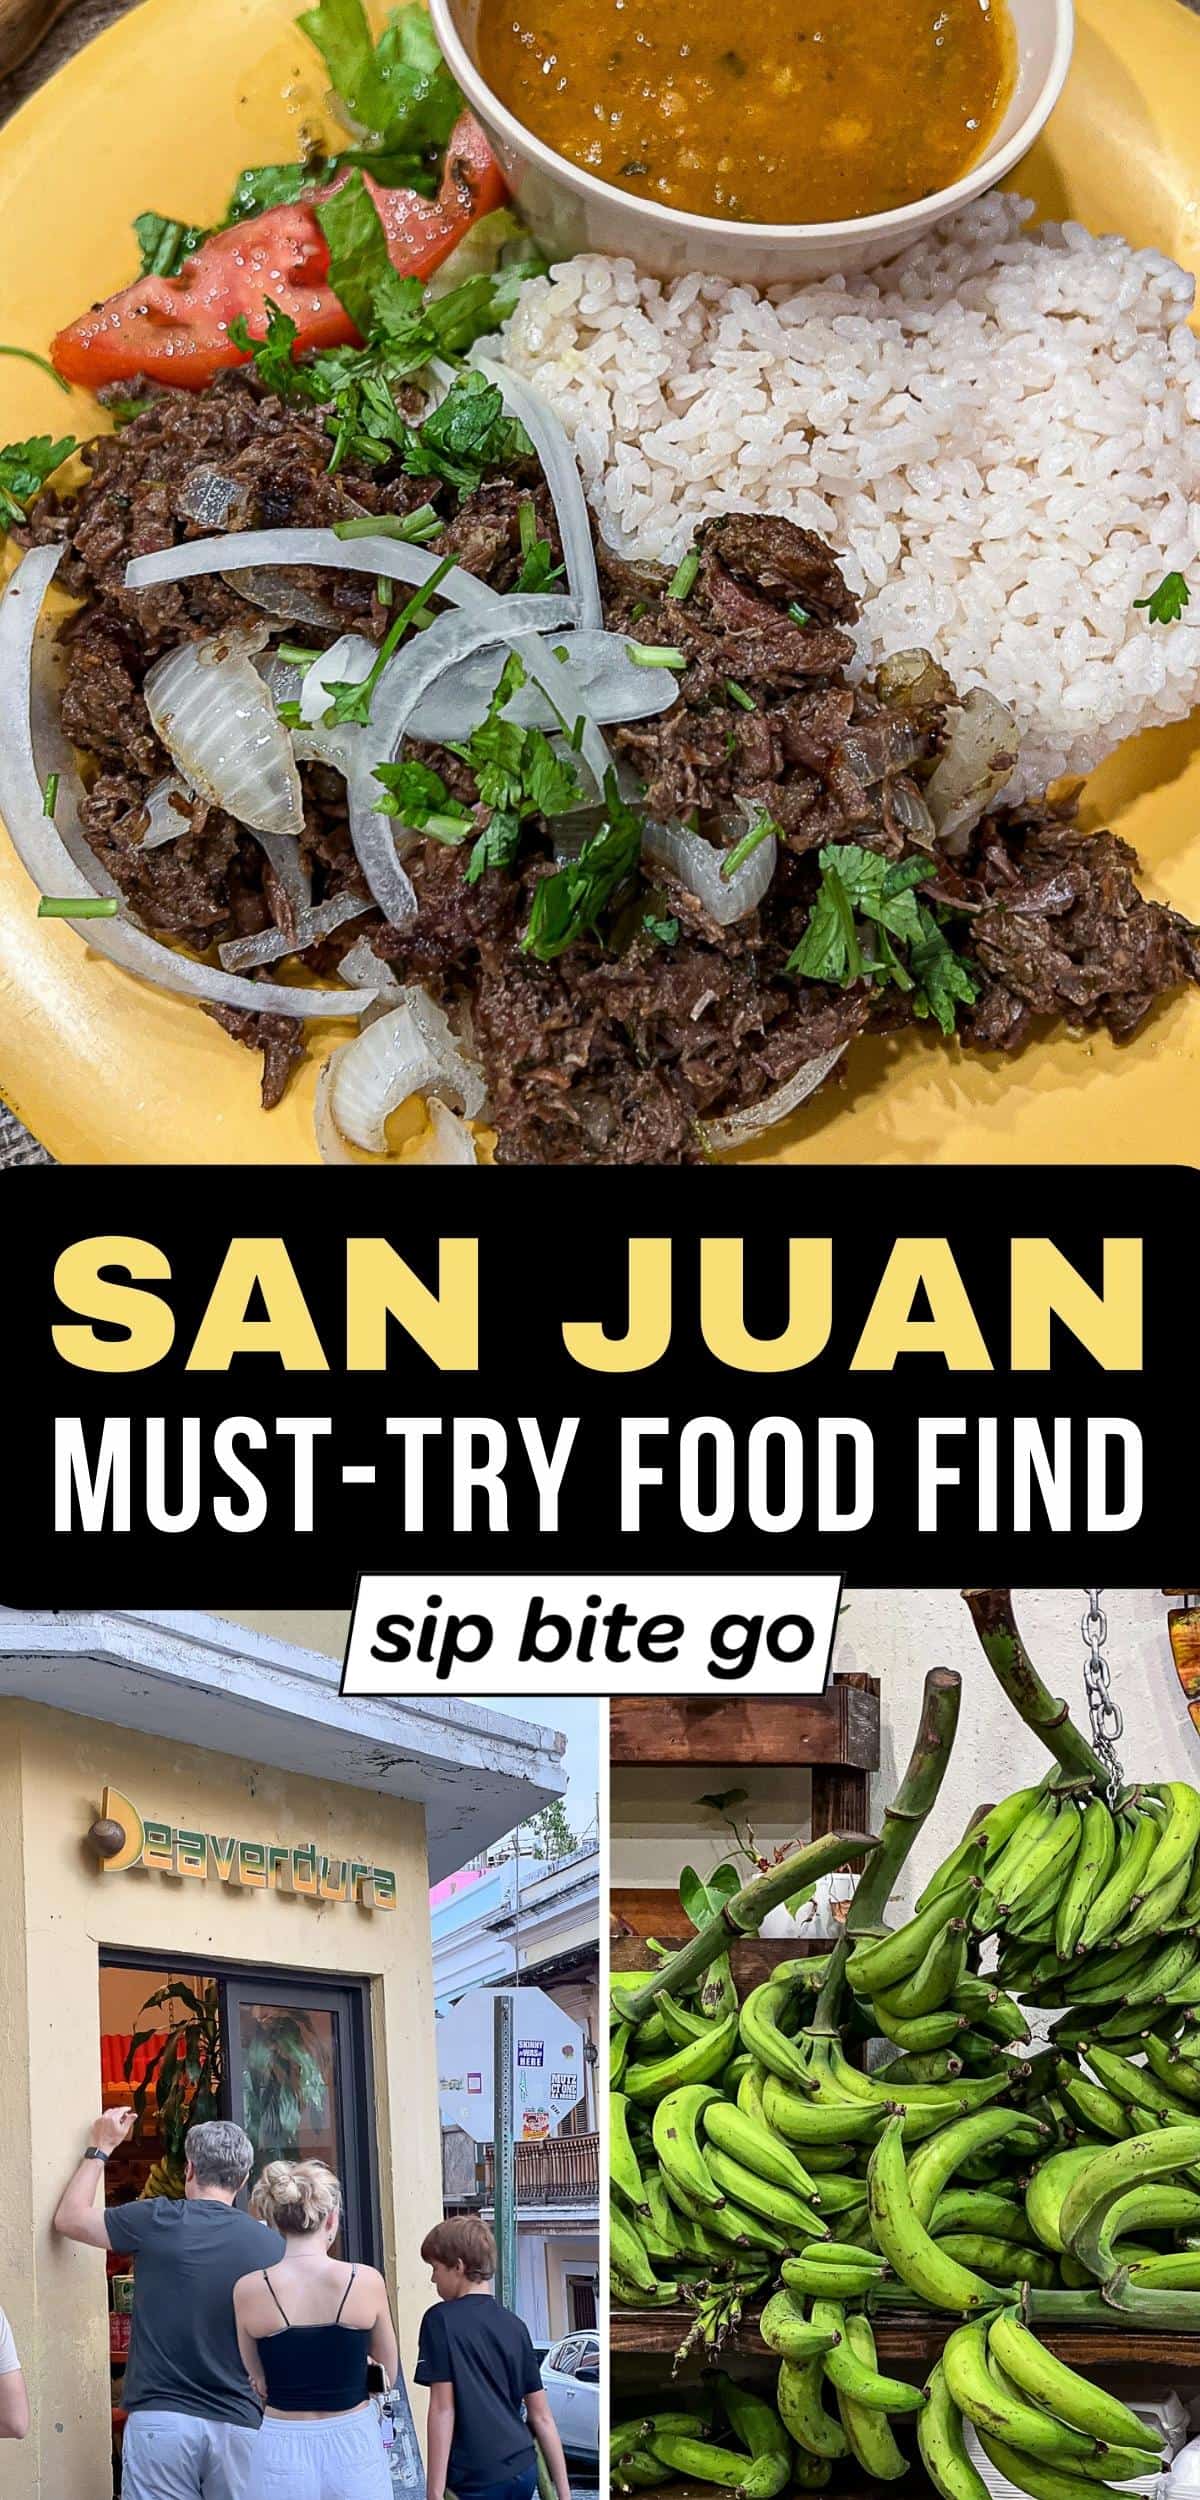 Deaverdura Restaurant MENU ITEMS and food to try in San Juan Puerto Rico with text overlay and Sip Bite Go logo